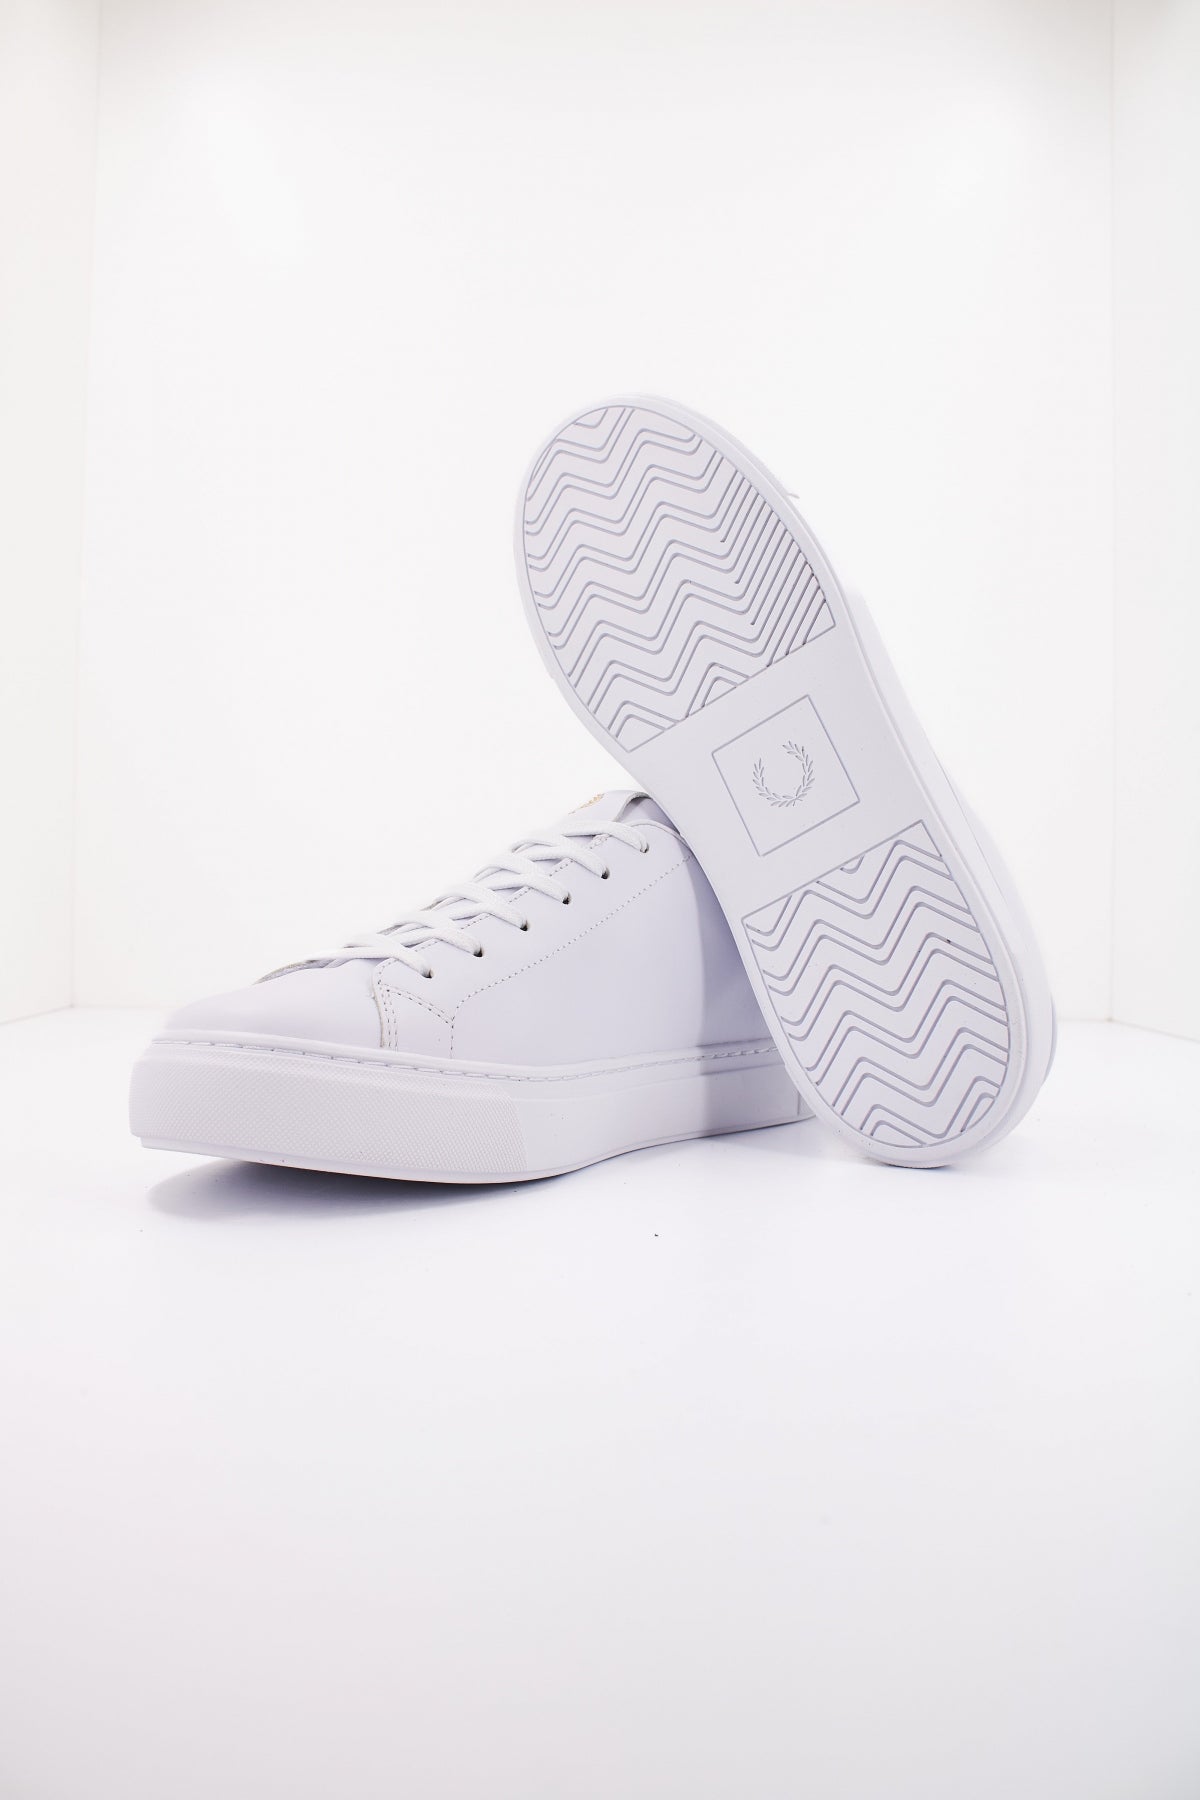 FRED PERRY B LEATHER en color BLANCO  (4)